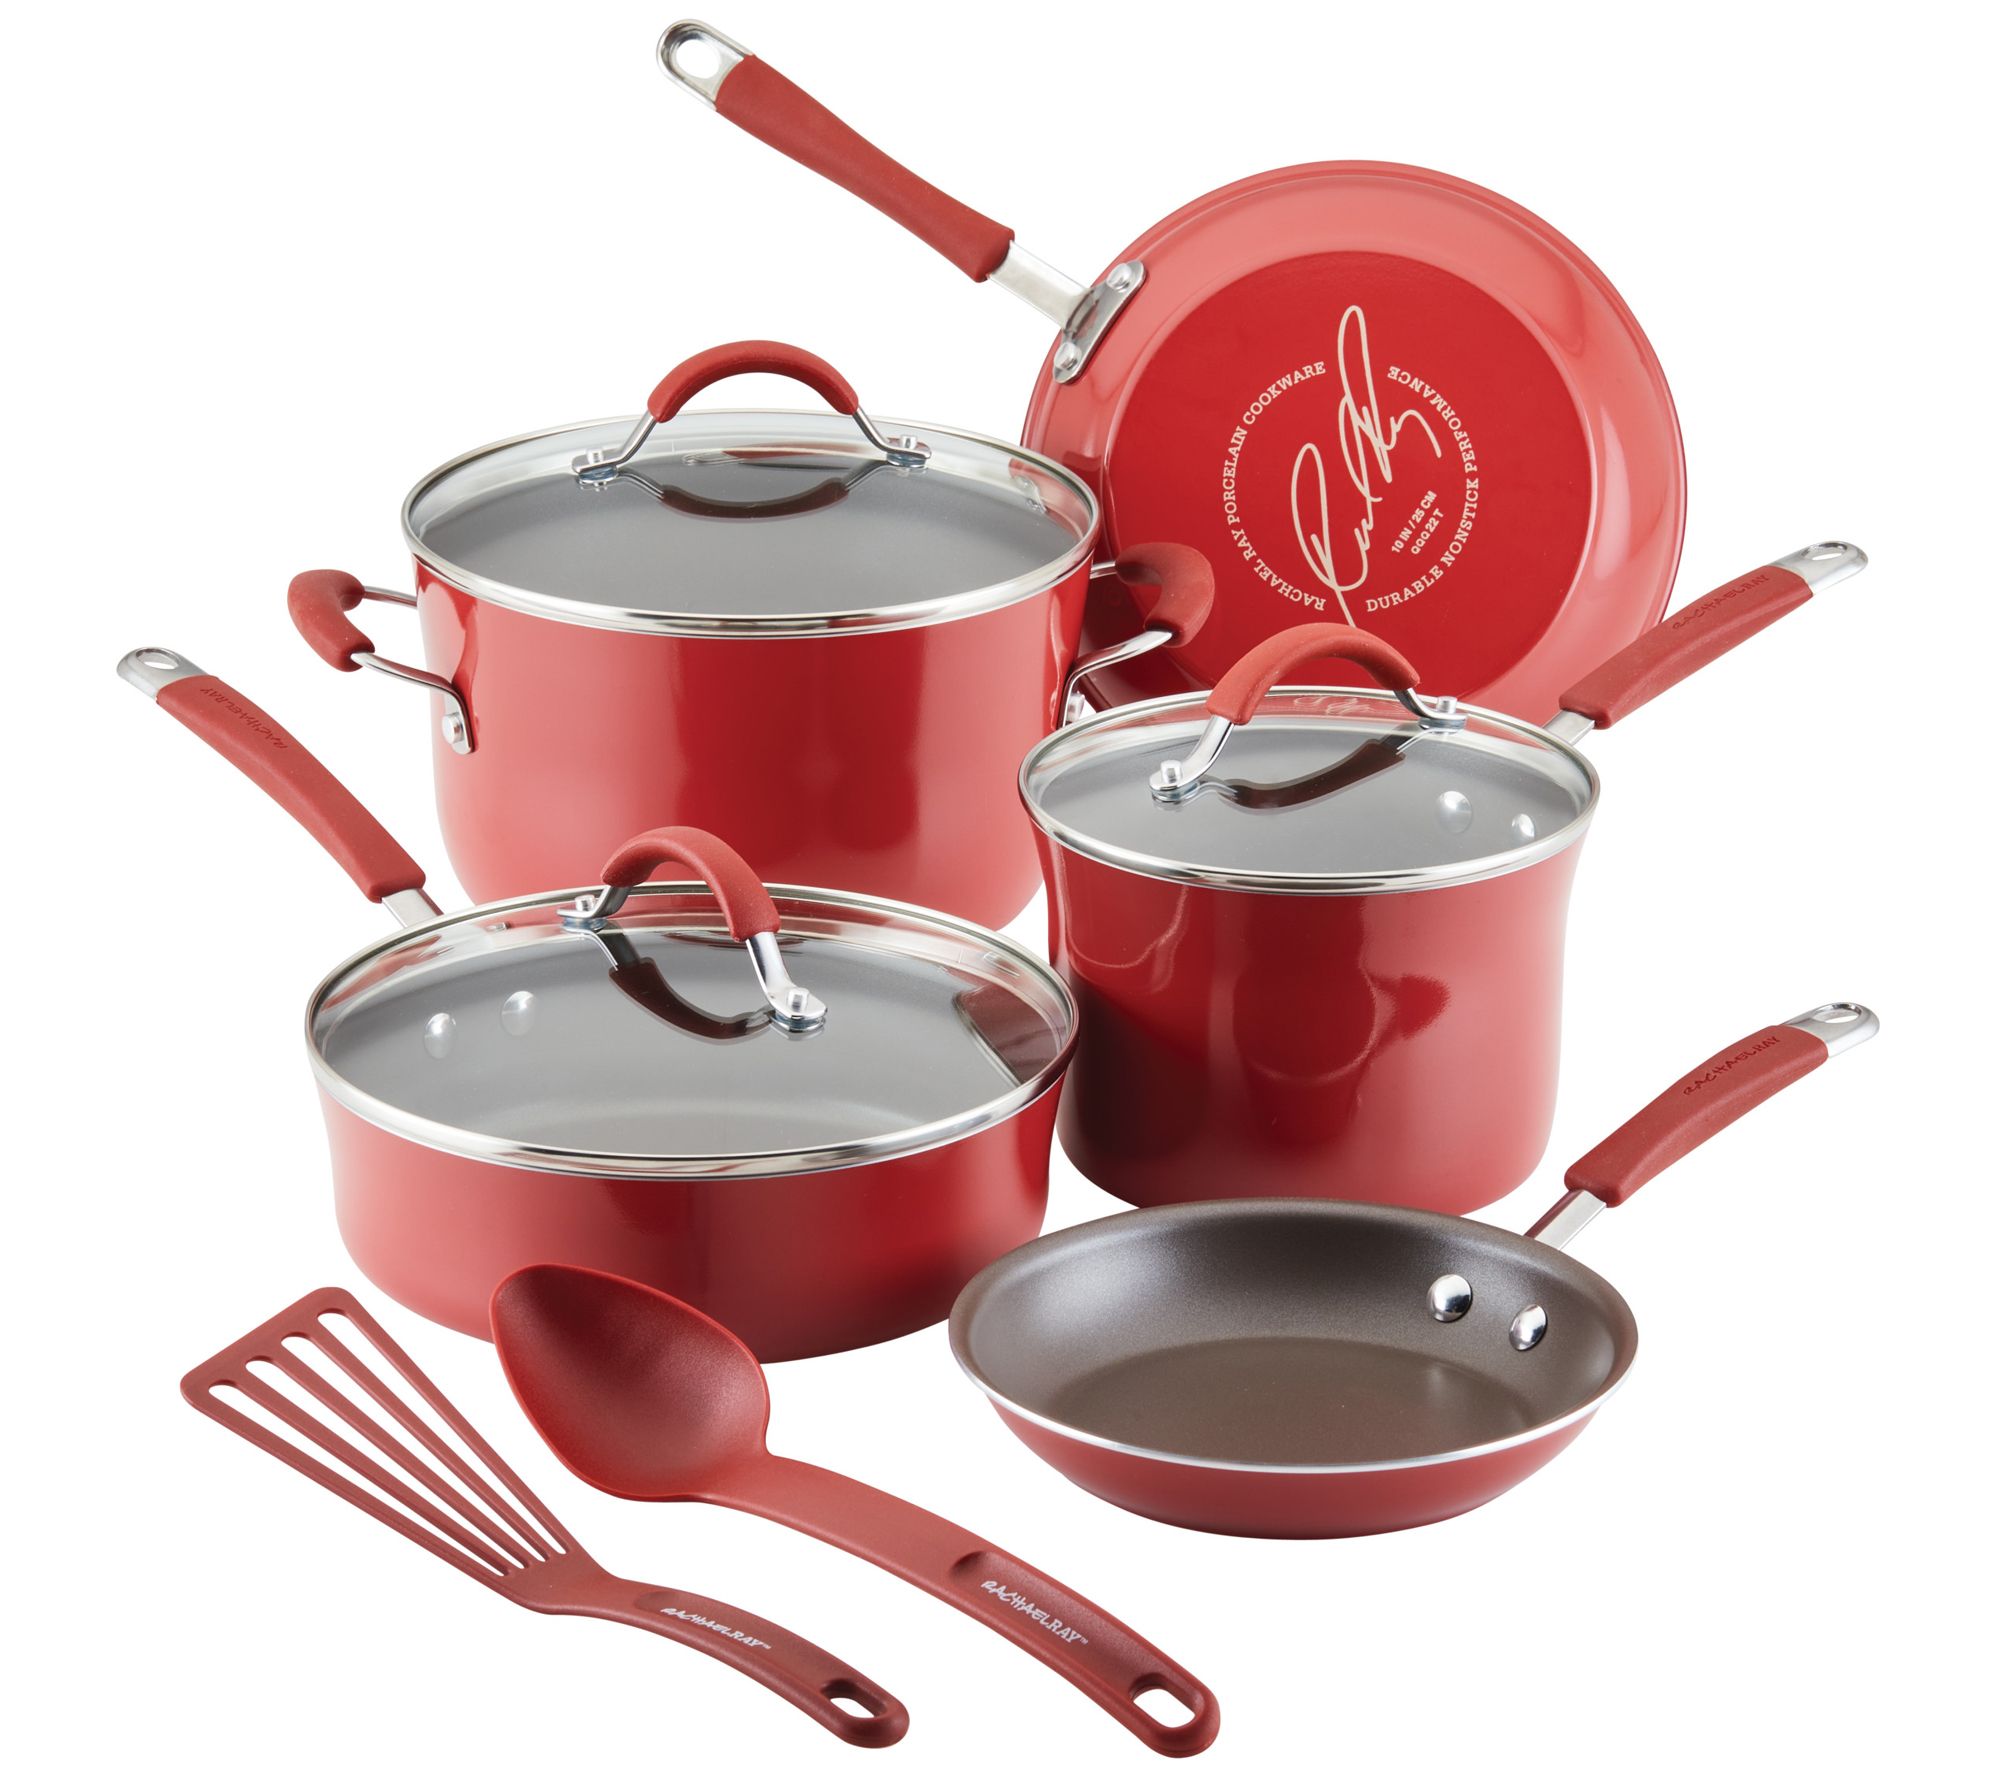 Rachael Ray Cucina Nonstick Bakeware Baking Pans Set, 10 Piece, Latte Brown  and Cranberry Red